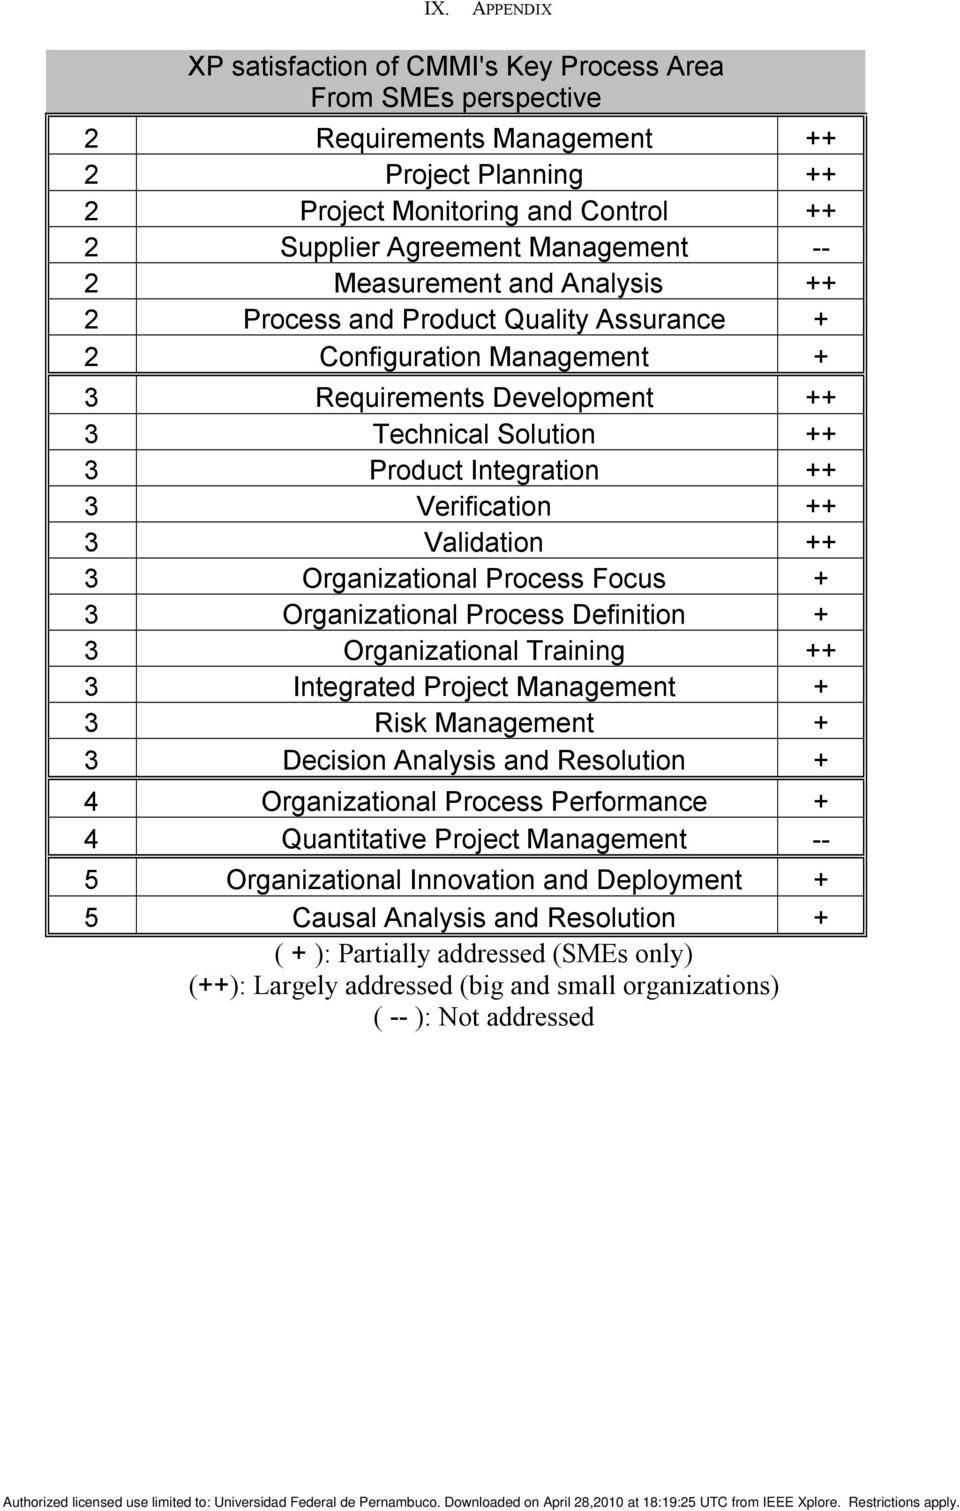 Validation ++ 3 Organizational Process Focus + 3 Organizational Process Definition + 3 Organizational Training ++ 3 Integrated Project Management + 3 Risk Management + 3 Decision Analysis and